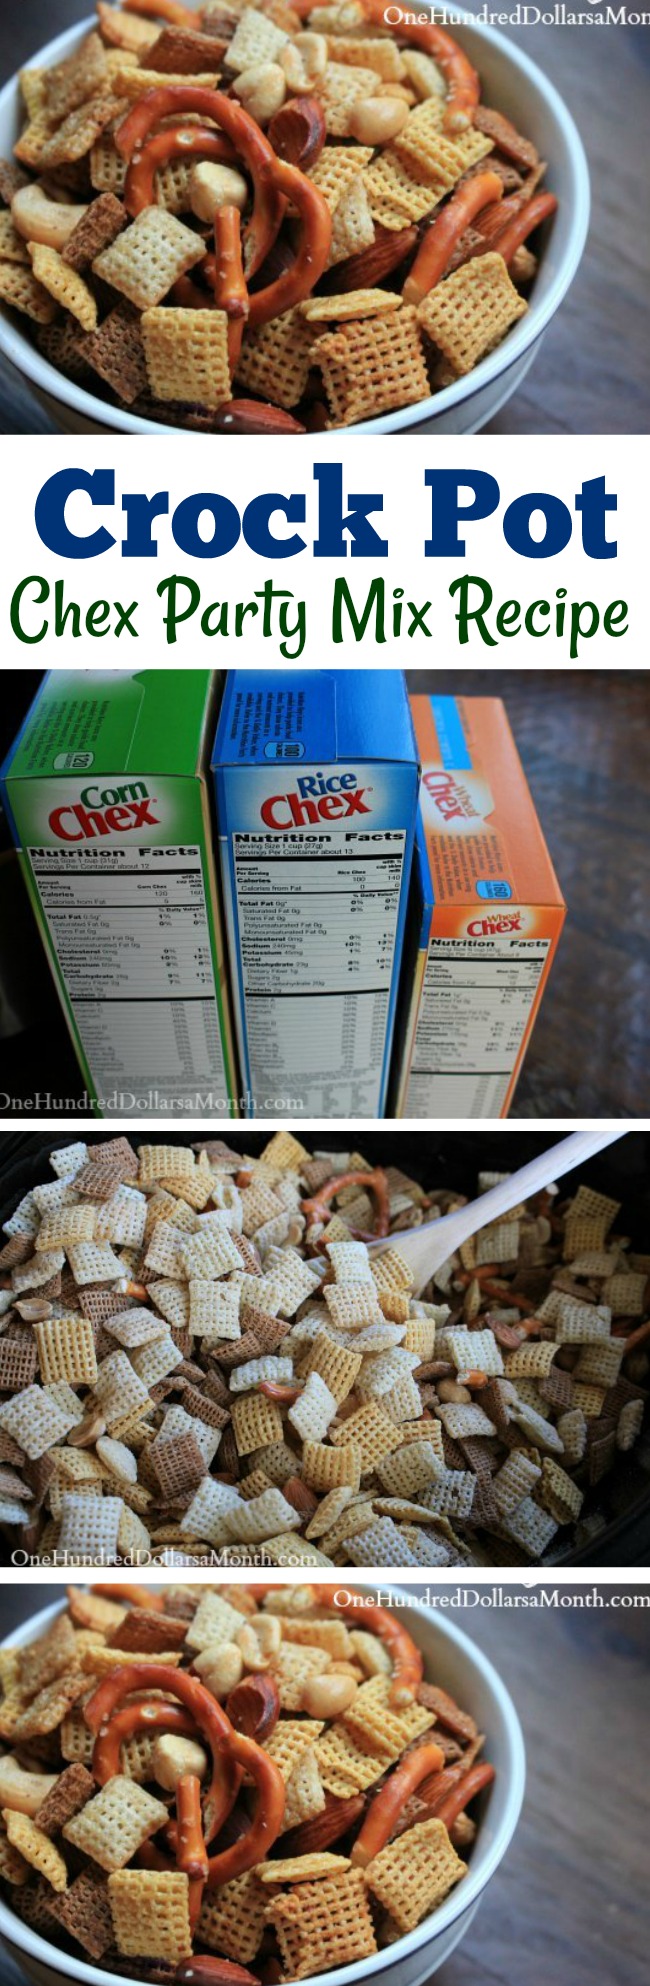 Slow Cooker Chex Party Mix Recipe